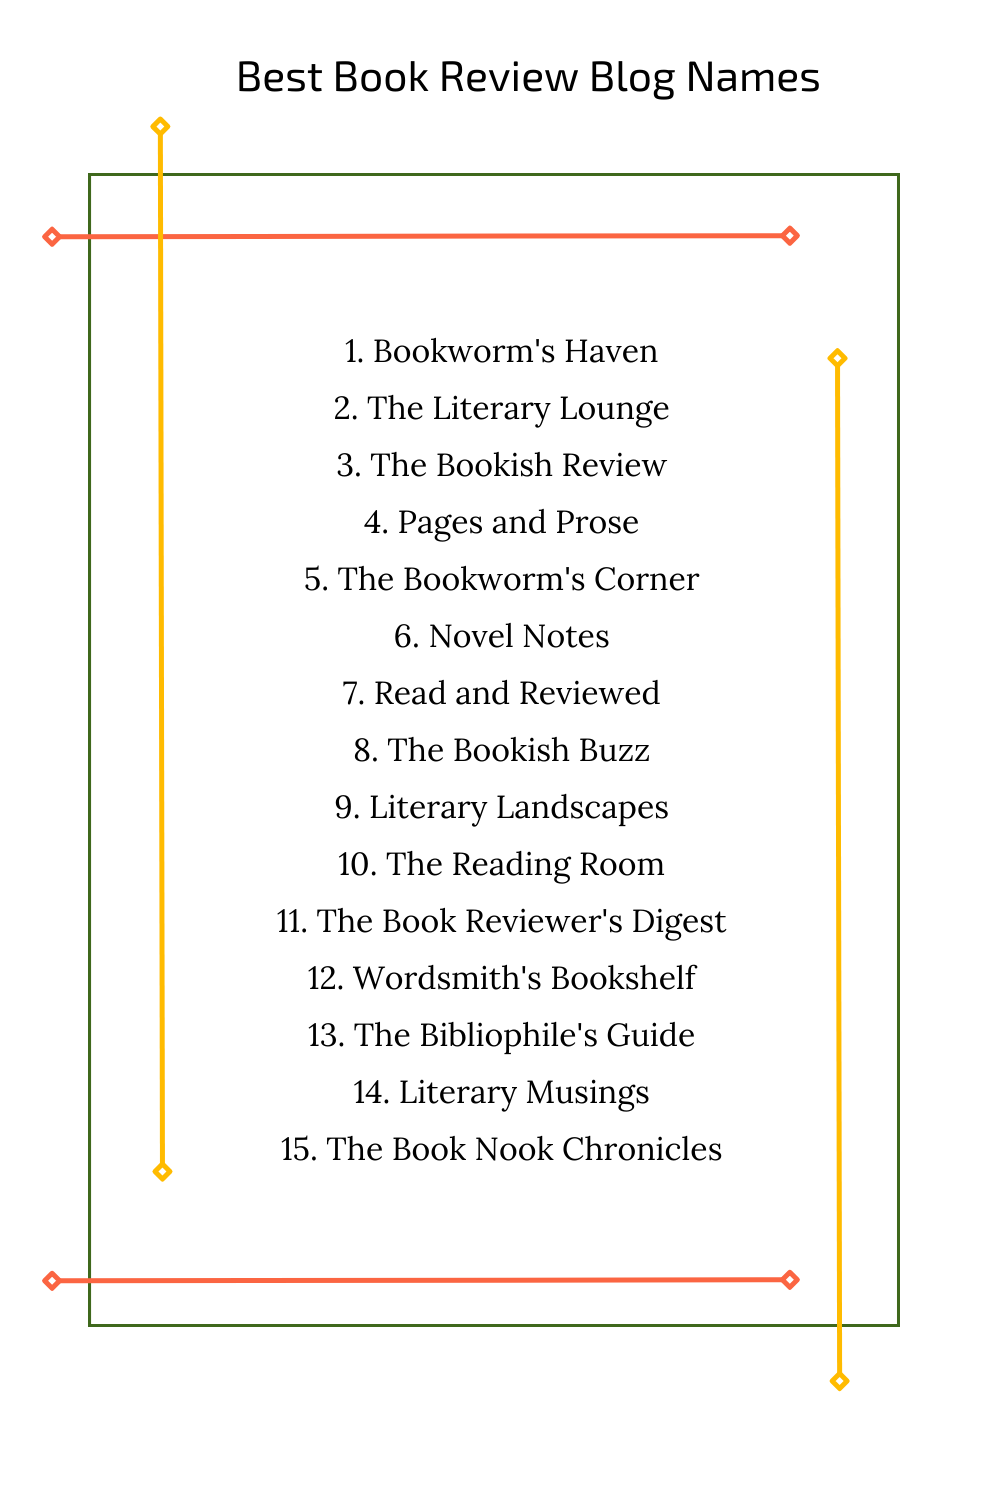 Best Book Review Blog Names